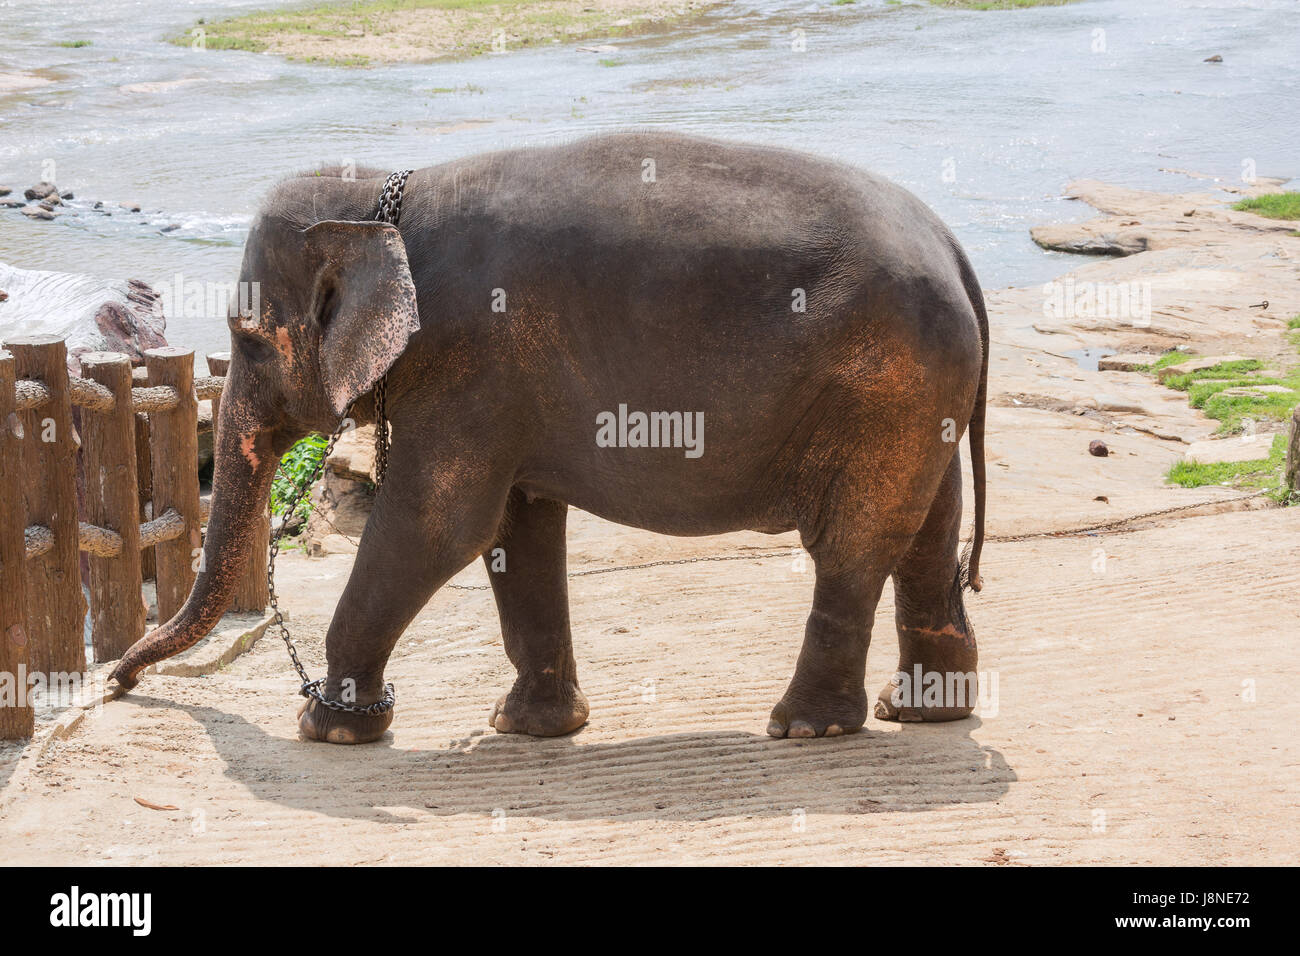 Elephant on a river bank restrained with a chain. Selective focus on the elephant. Stock Photo